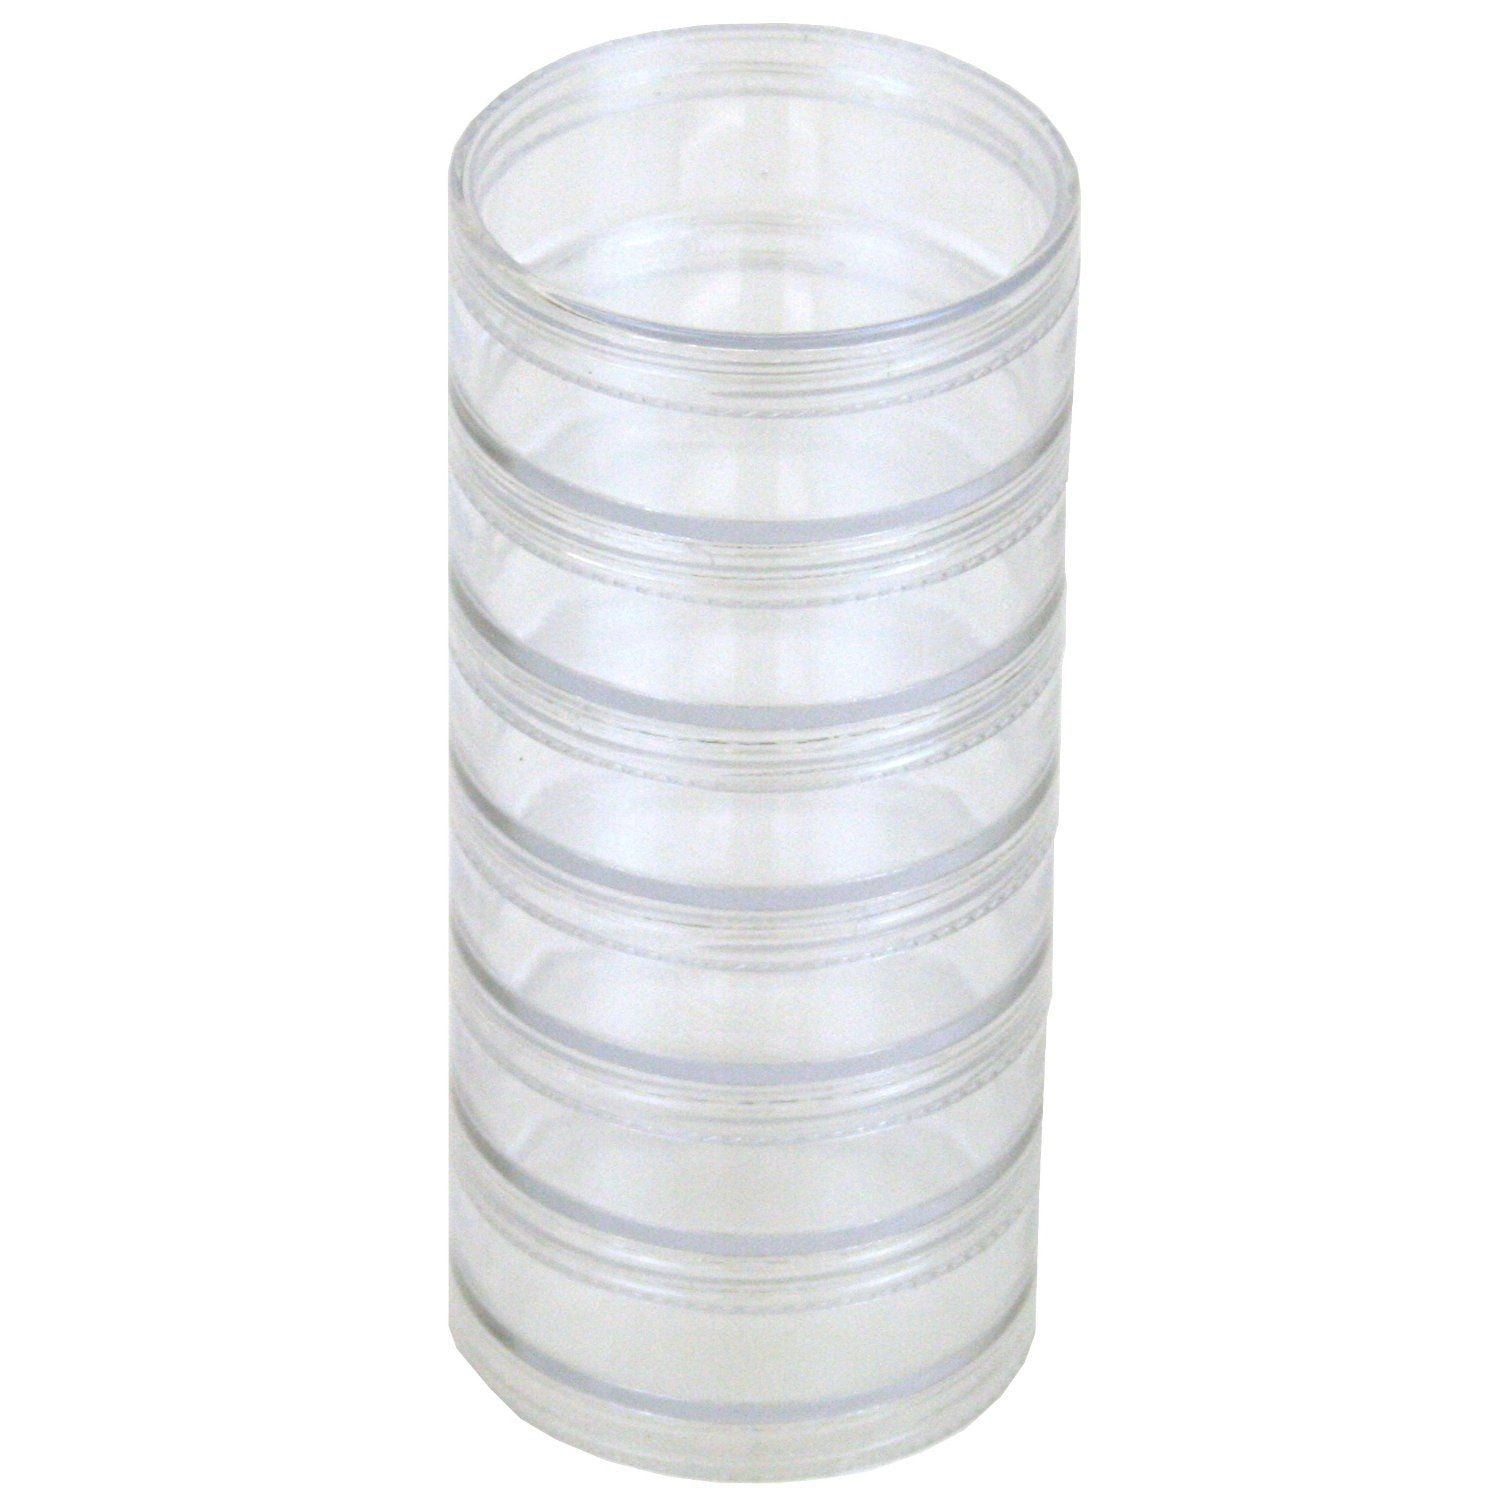 6 Slot 4in. Round Storage Container for 10mm Beads - Stone Cold Fishing  Beads